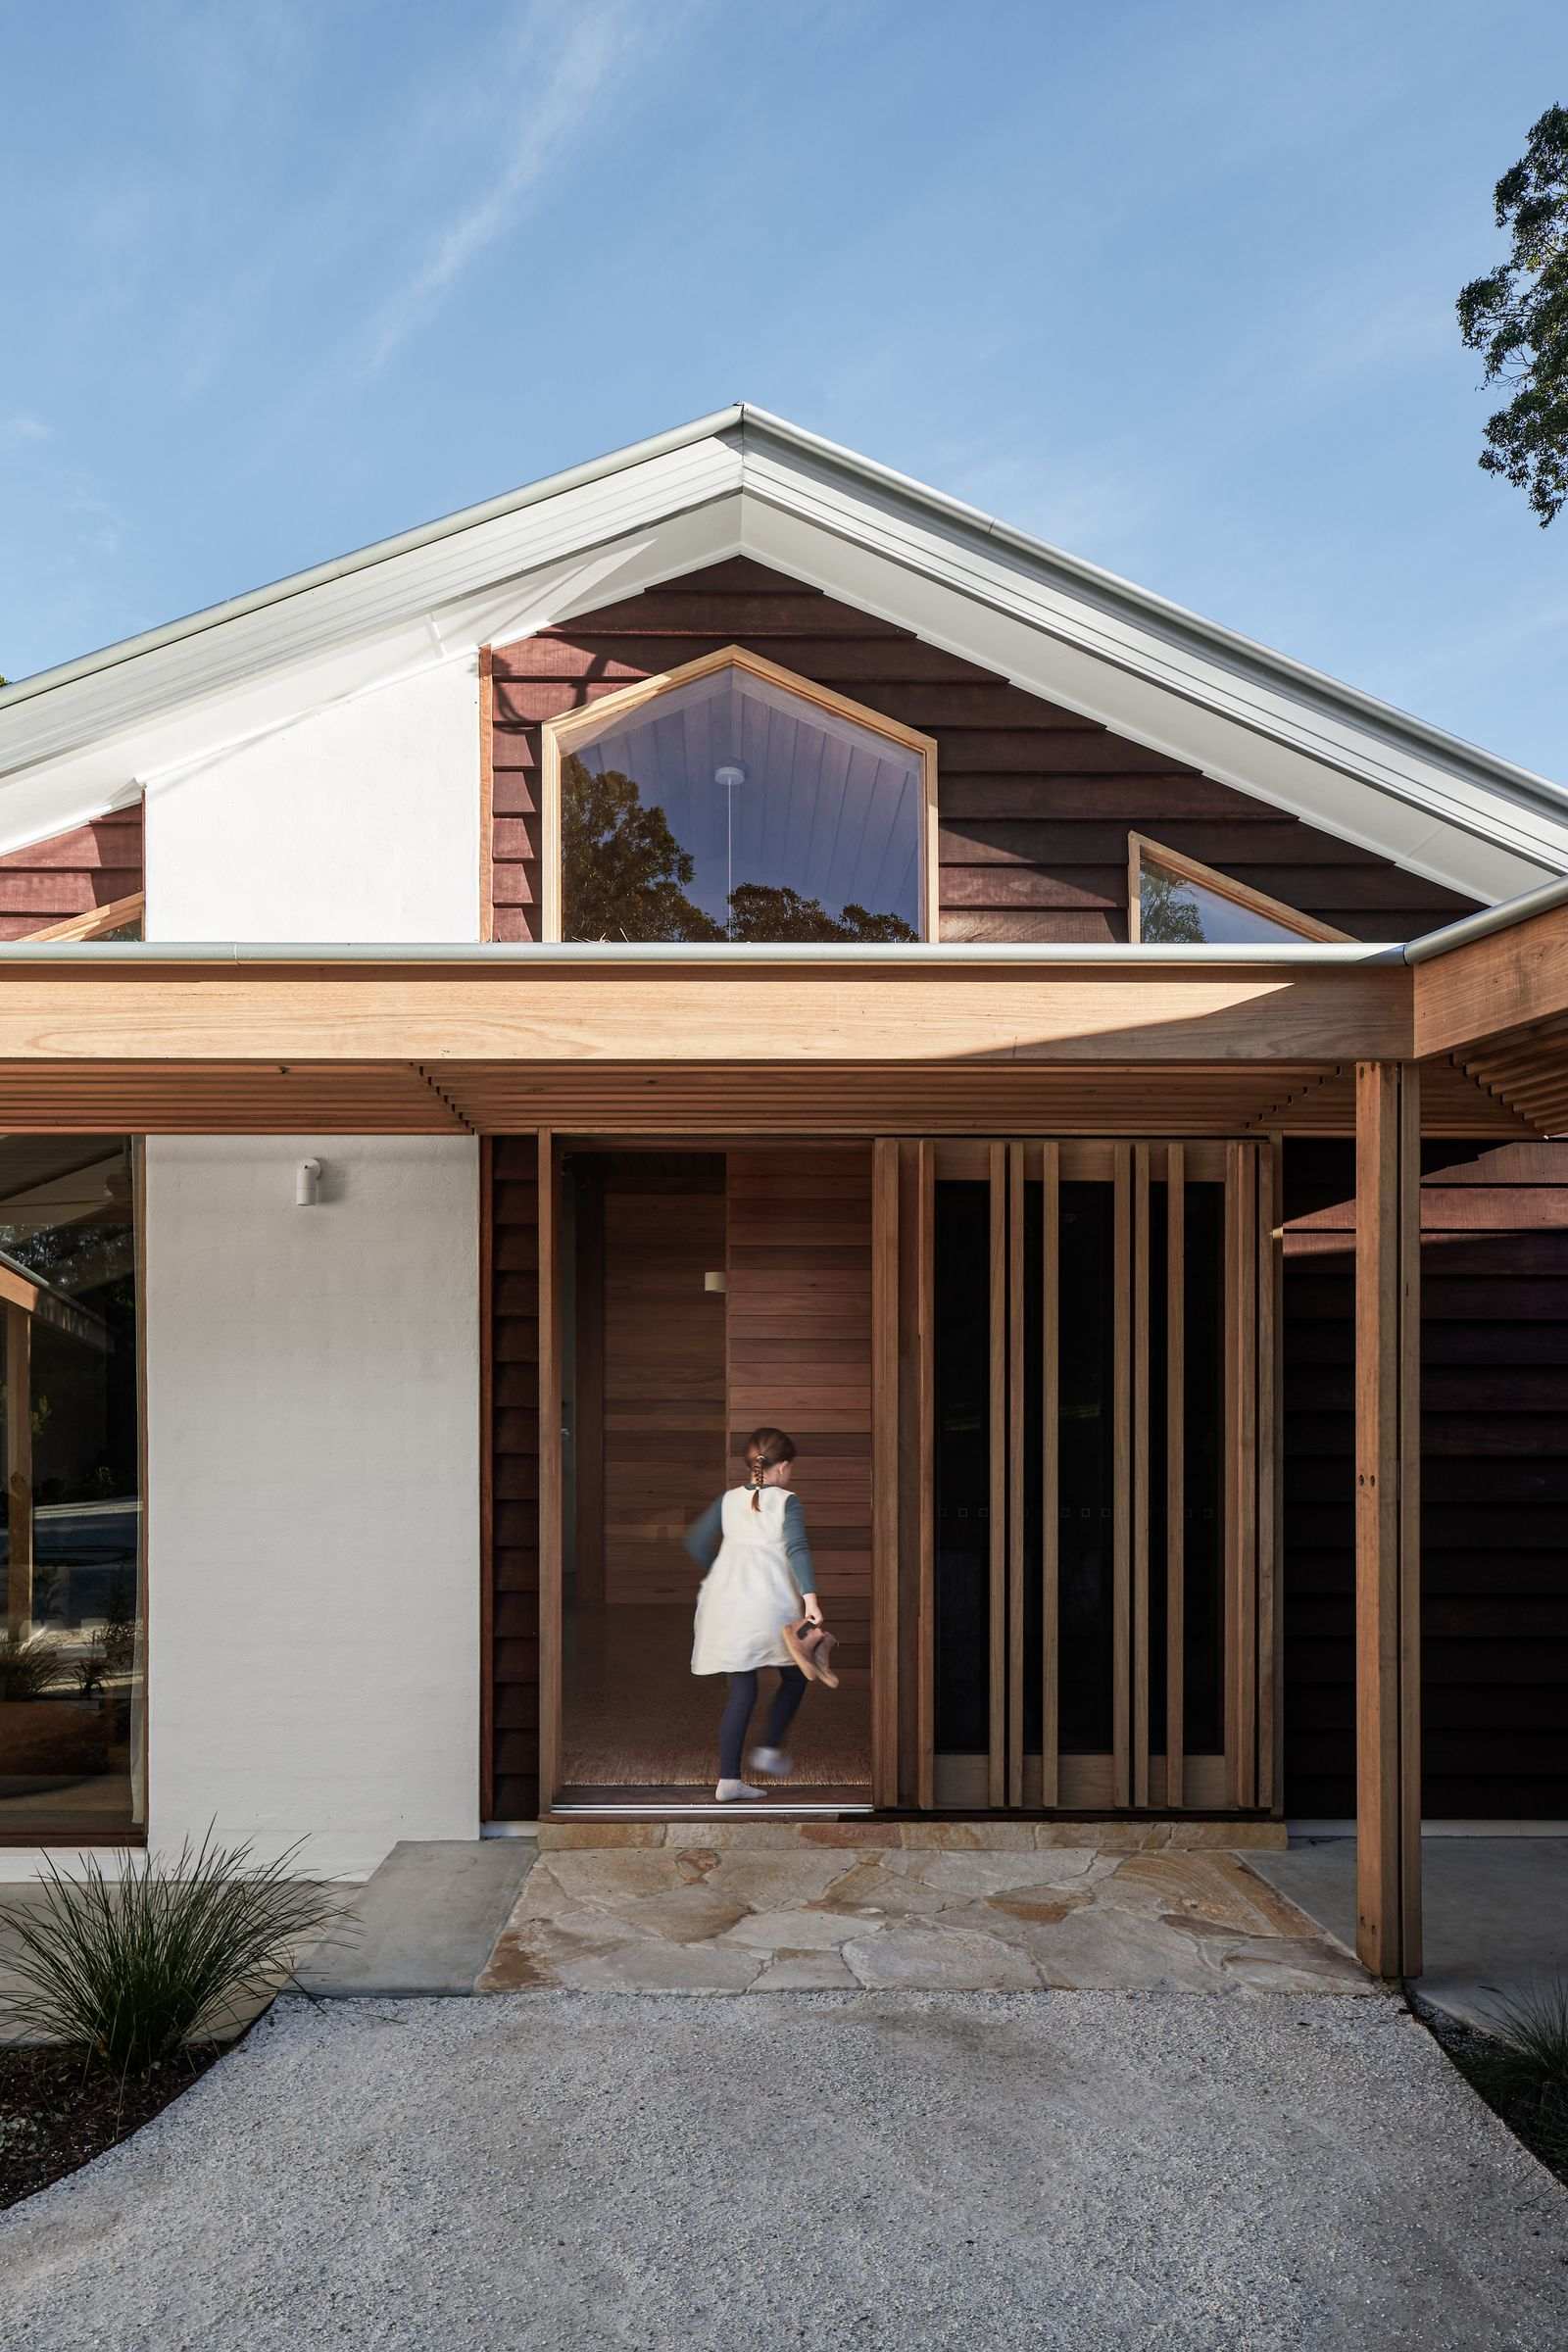 The Caretaker's by Aphora Architecture showing the front entry door made out of timber